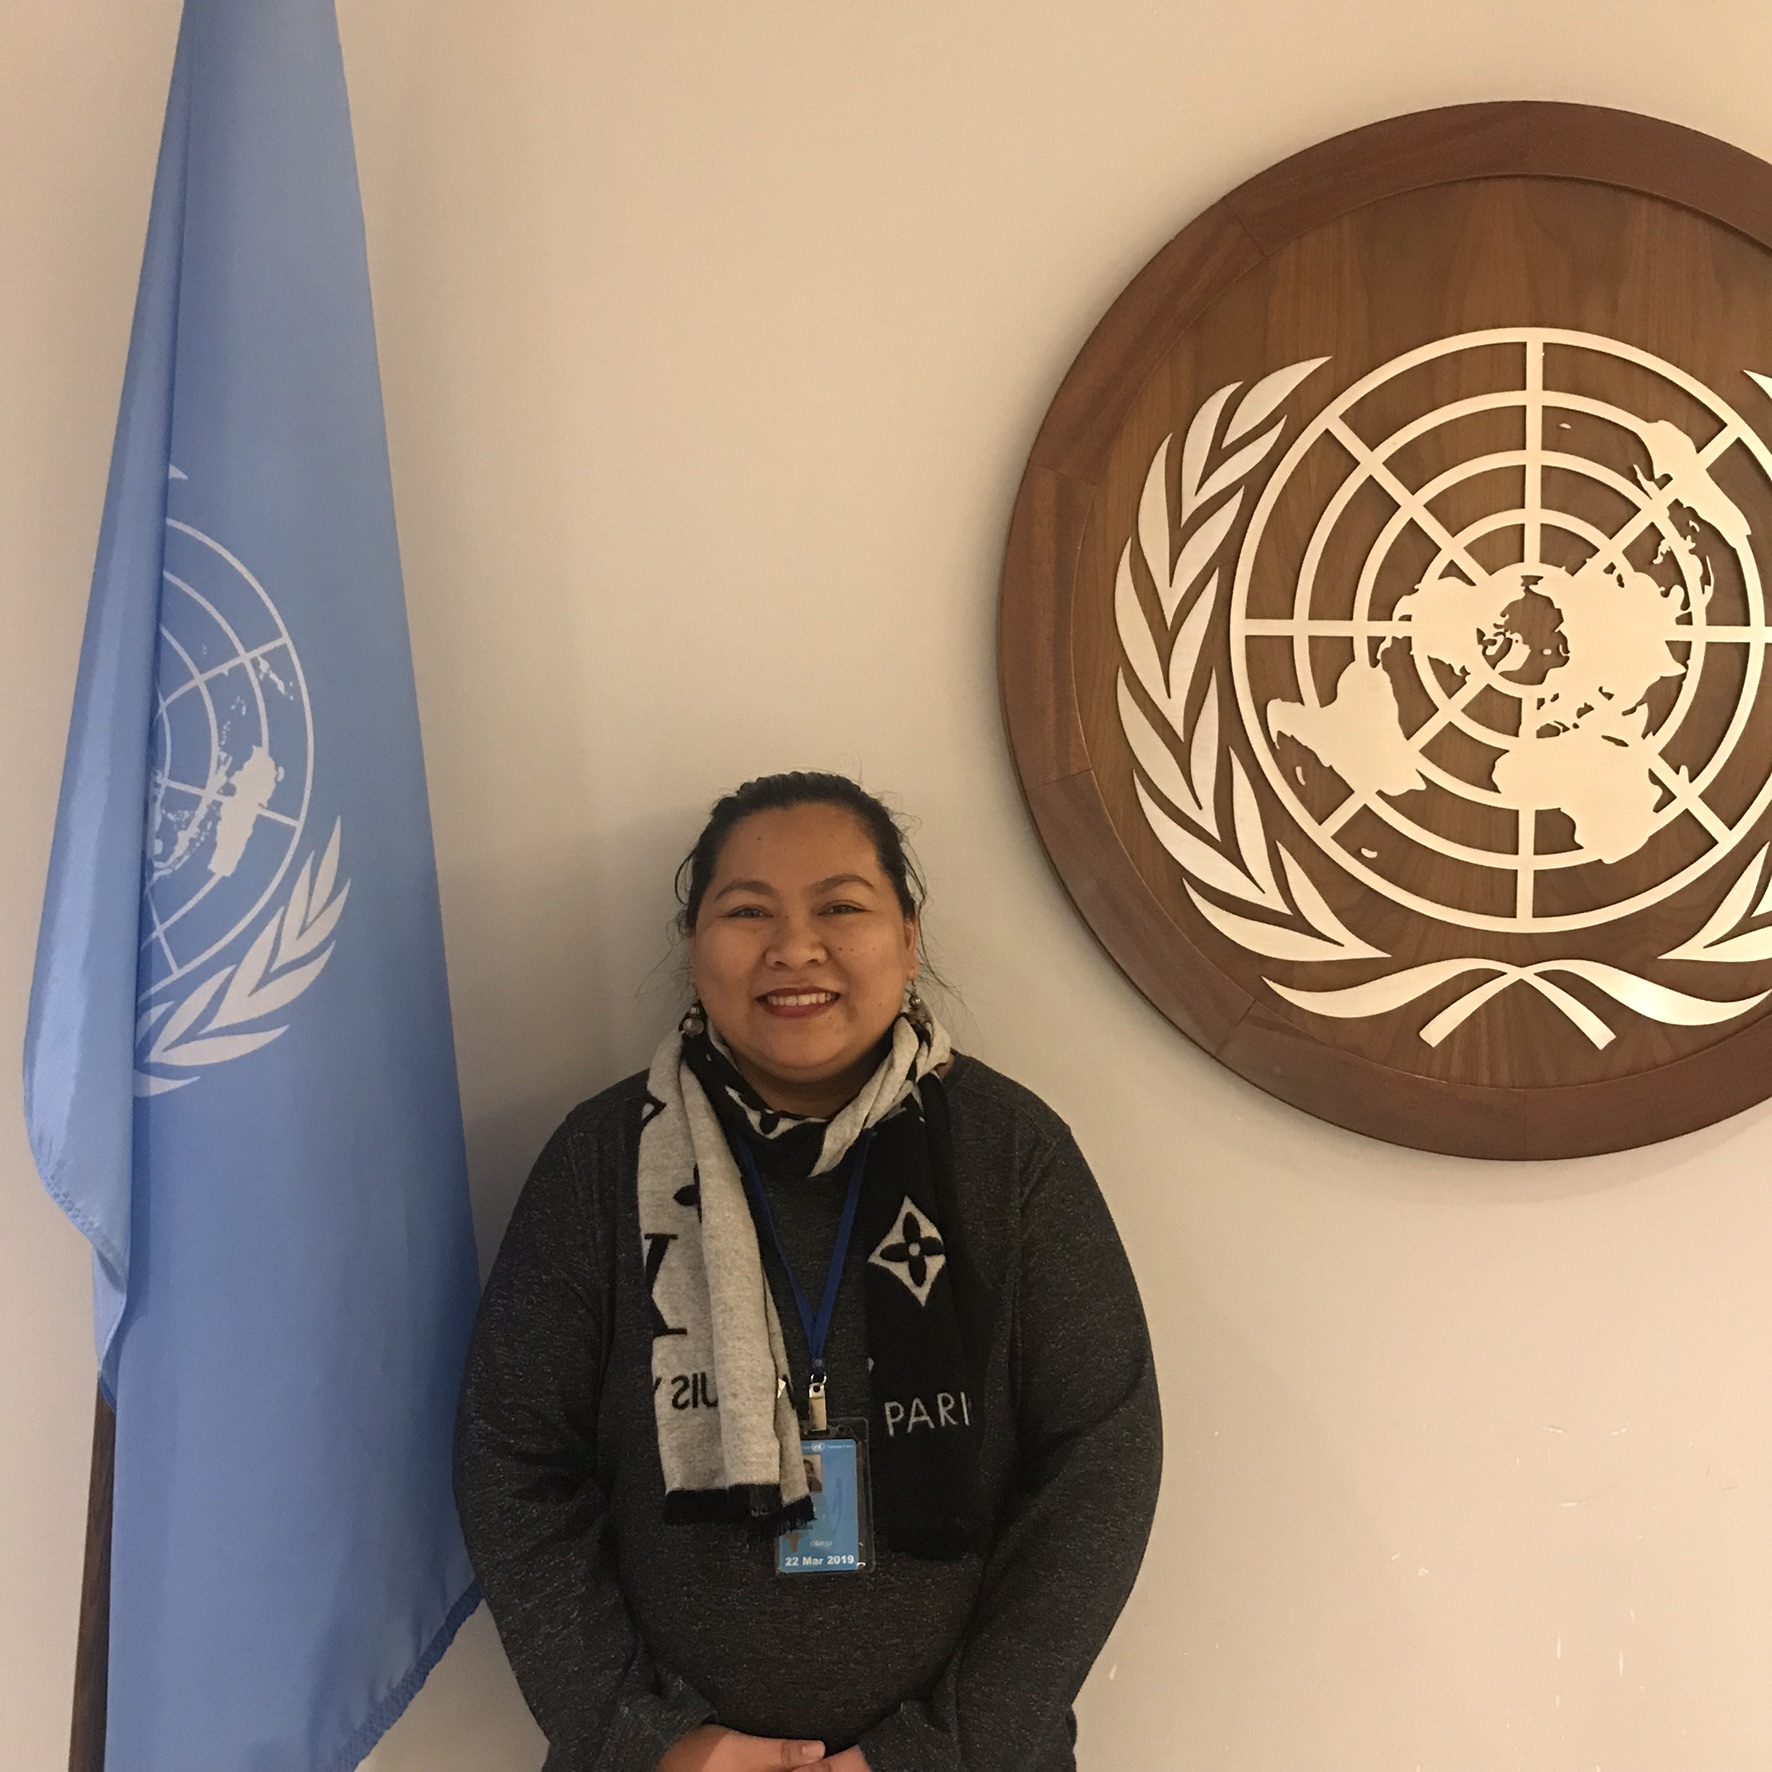 Strategic Partnerships director attends UN meeting as delegate